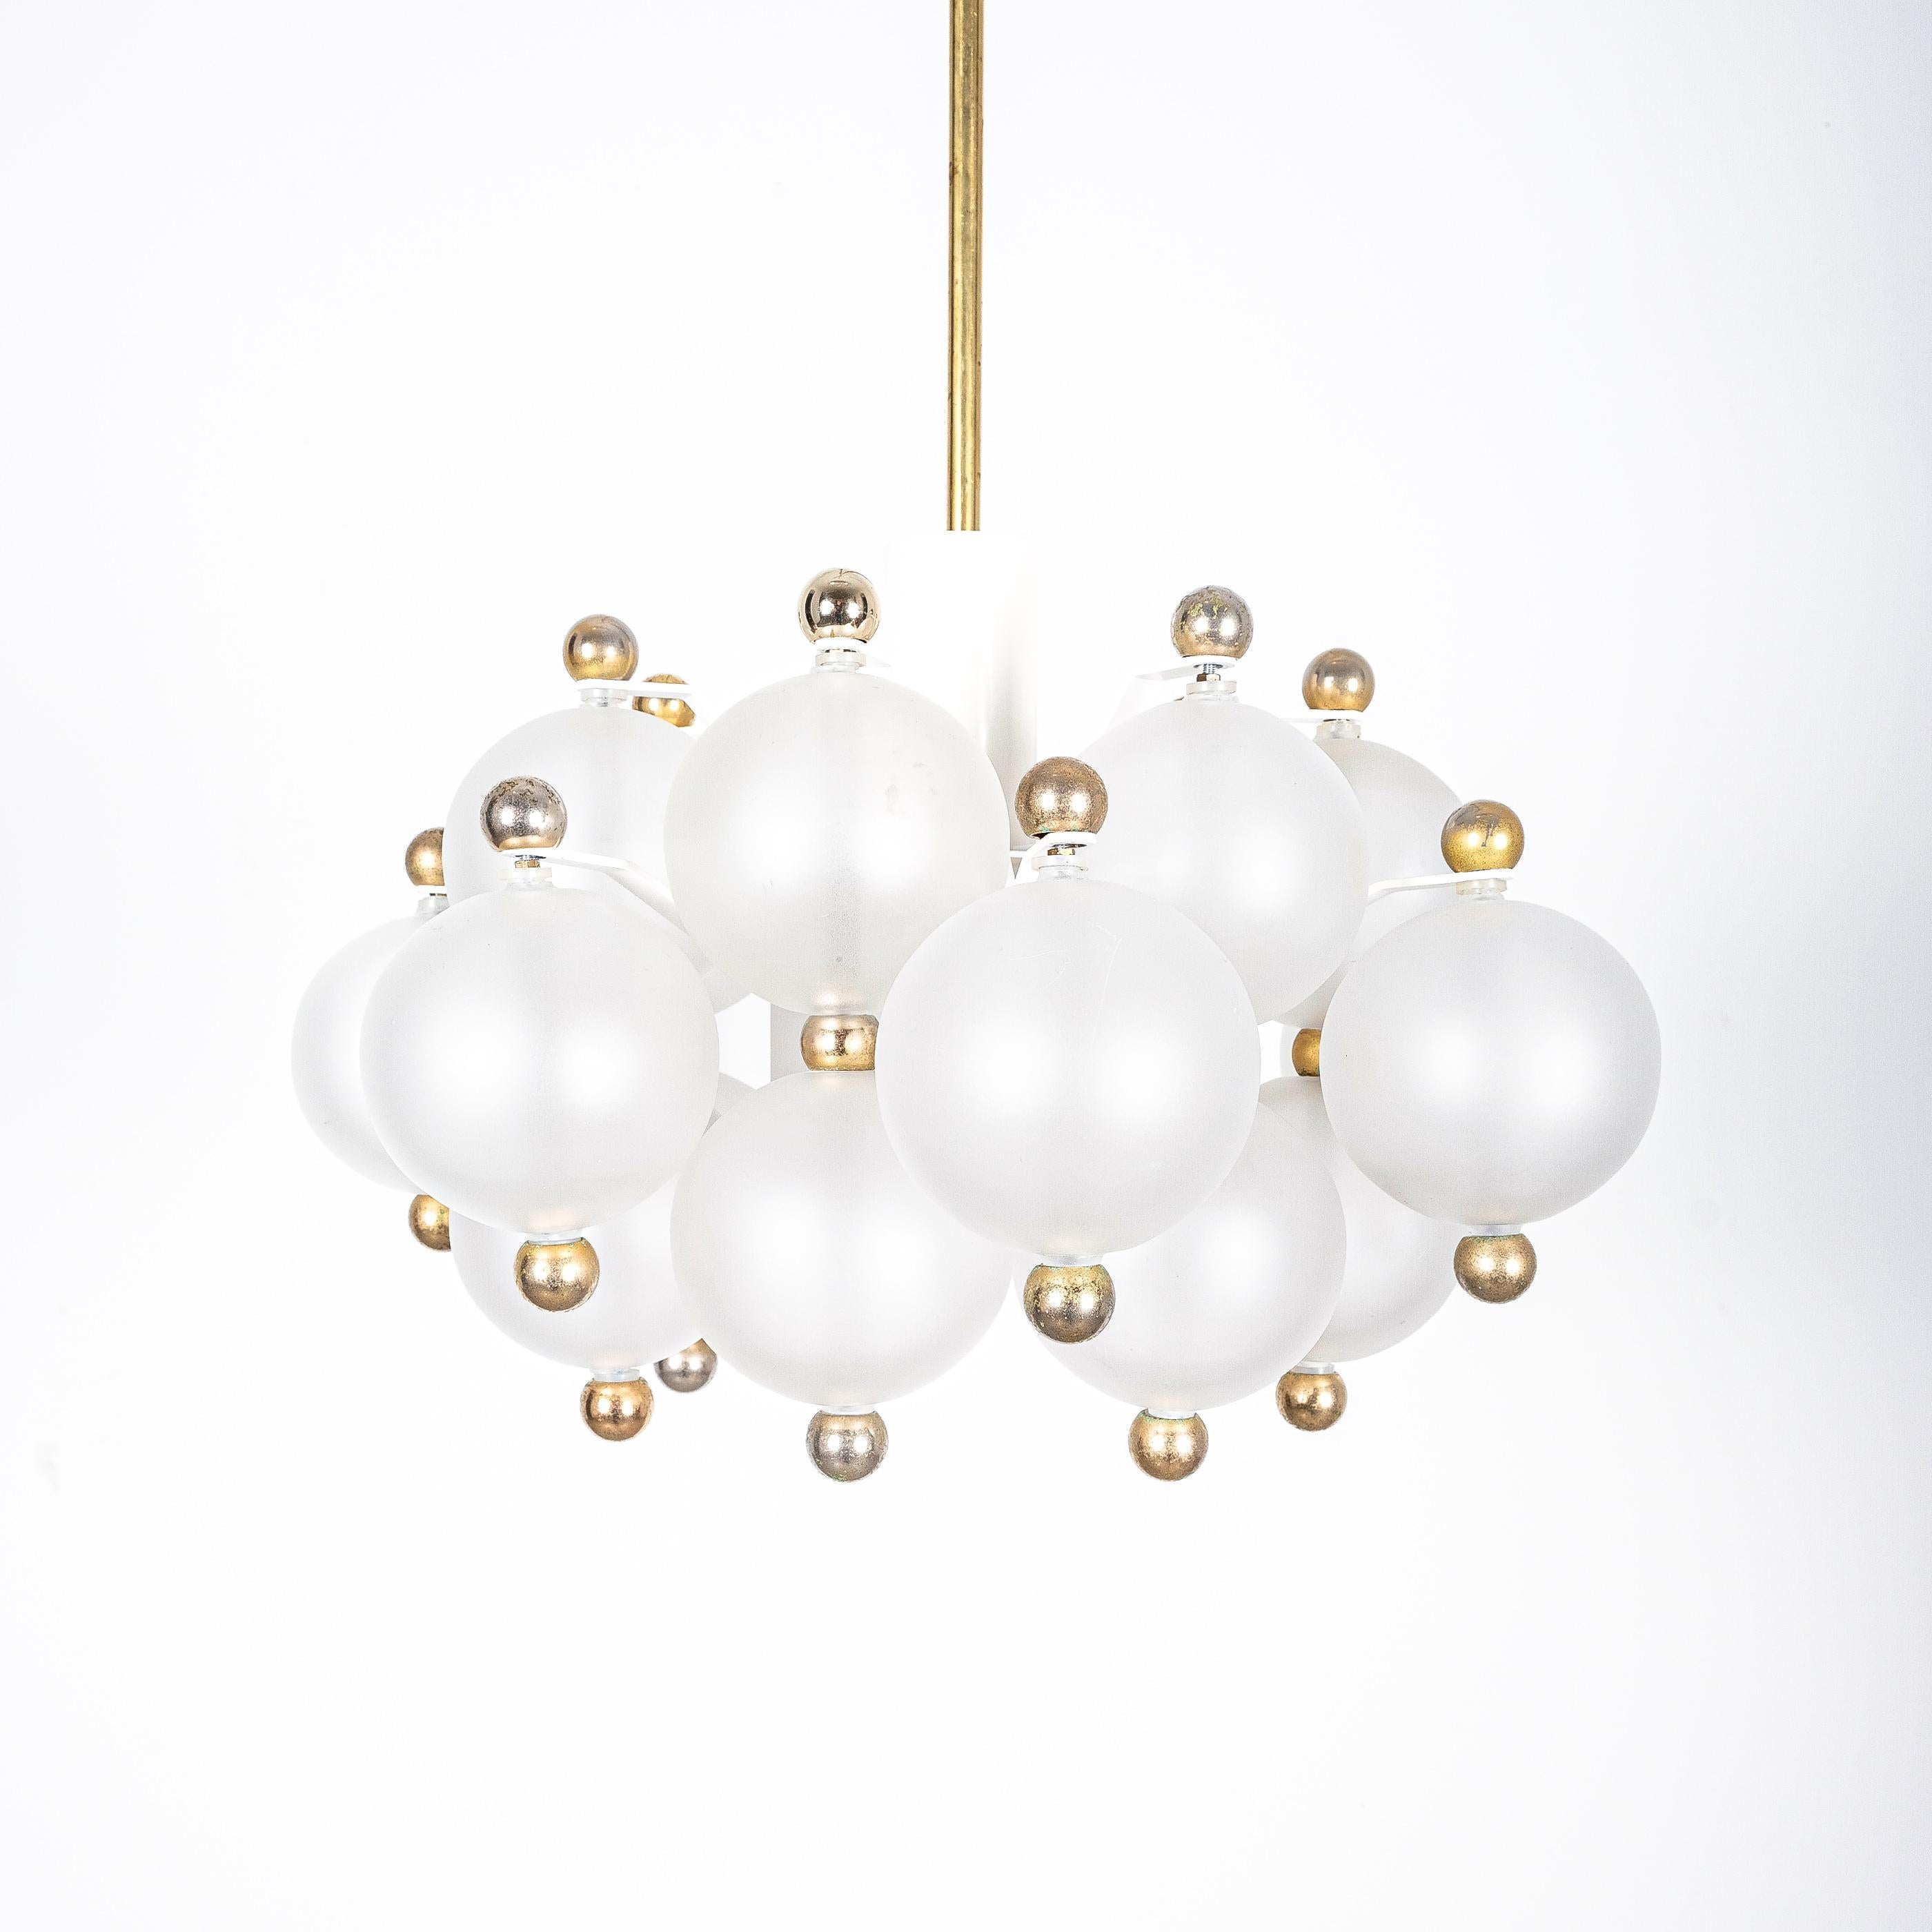 Mid-Century Modern Satin Glass Chandeliers '2' by Kinkeldey with Gold Knobs, circa 1970 For Sale